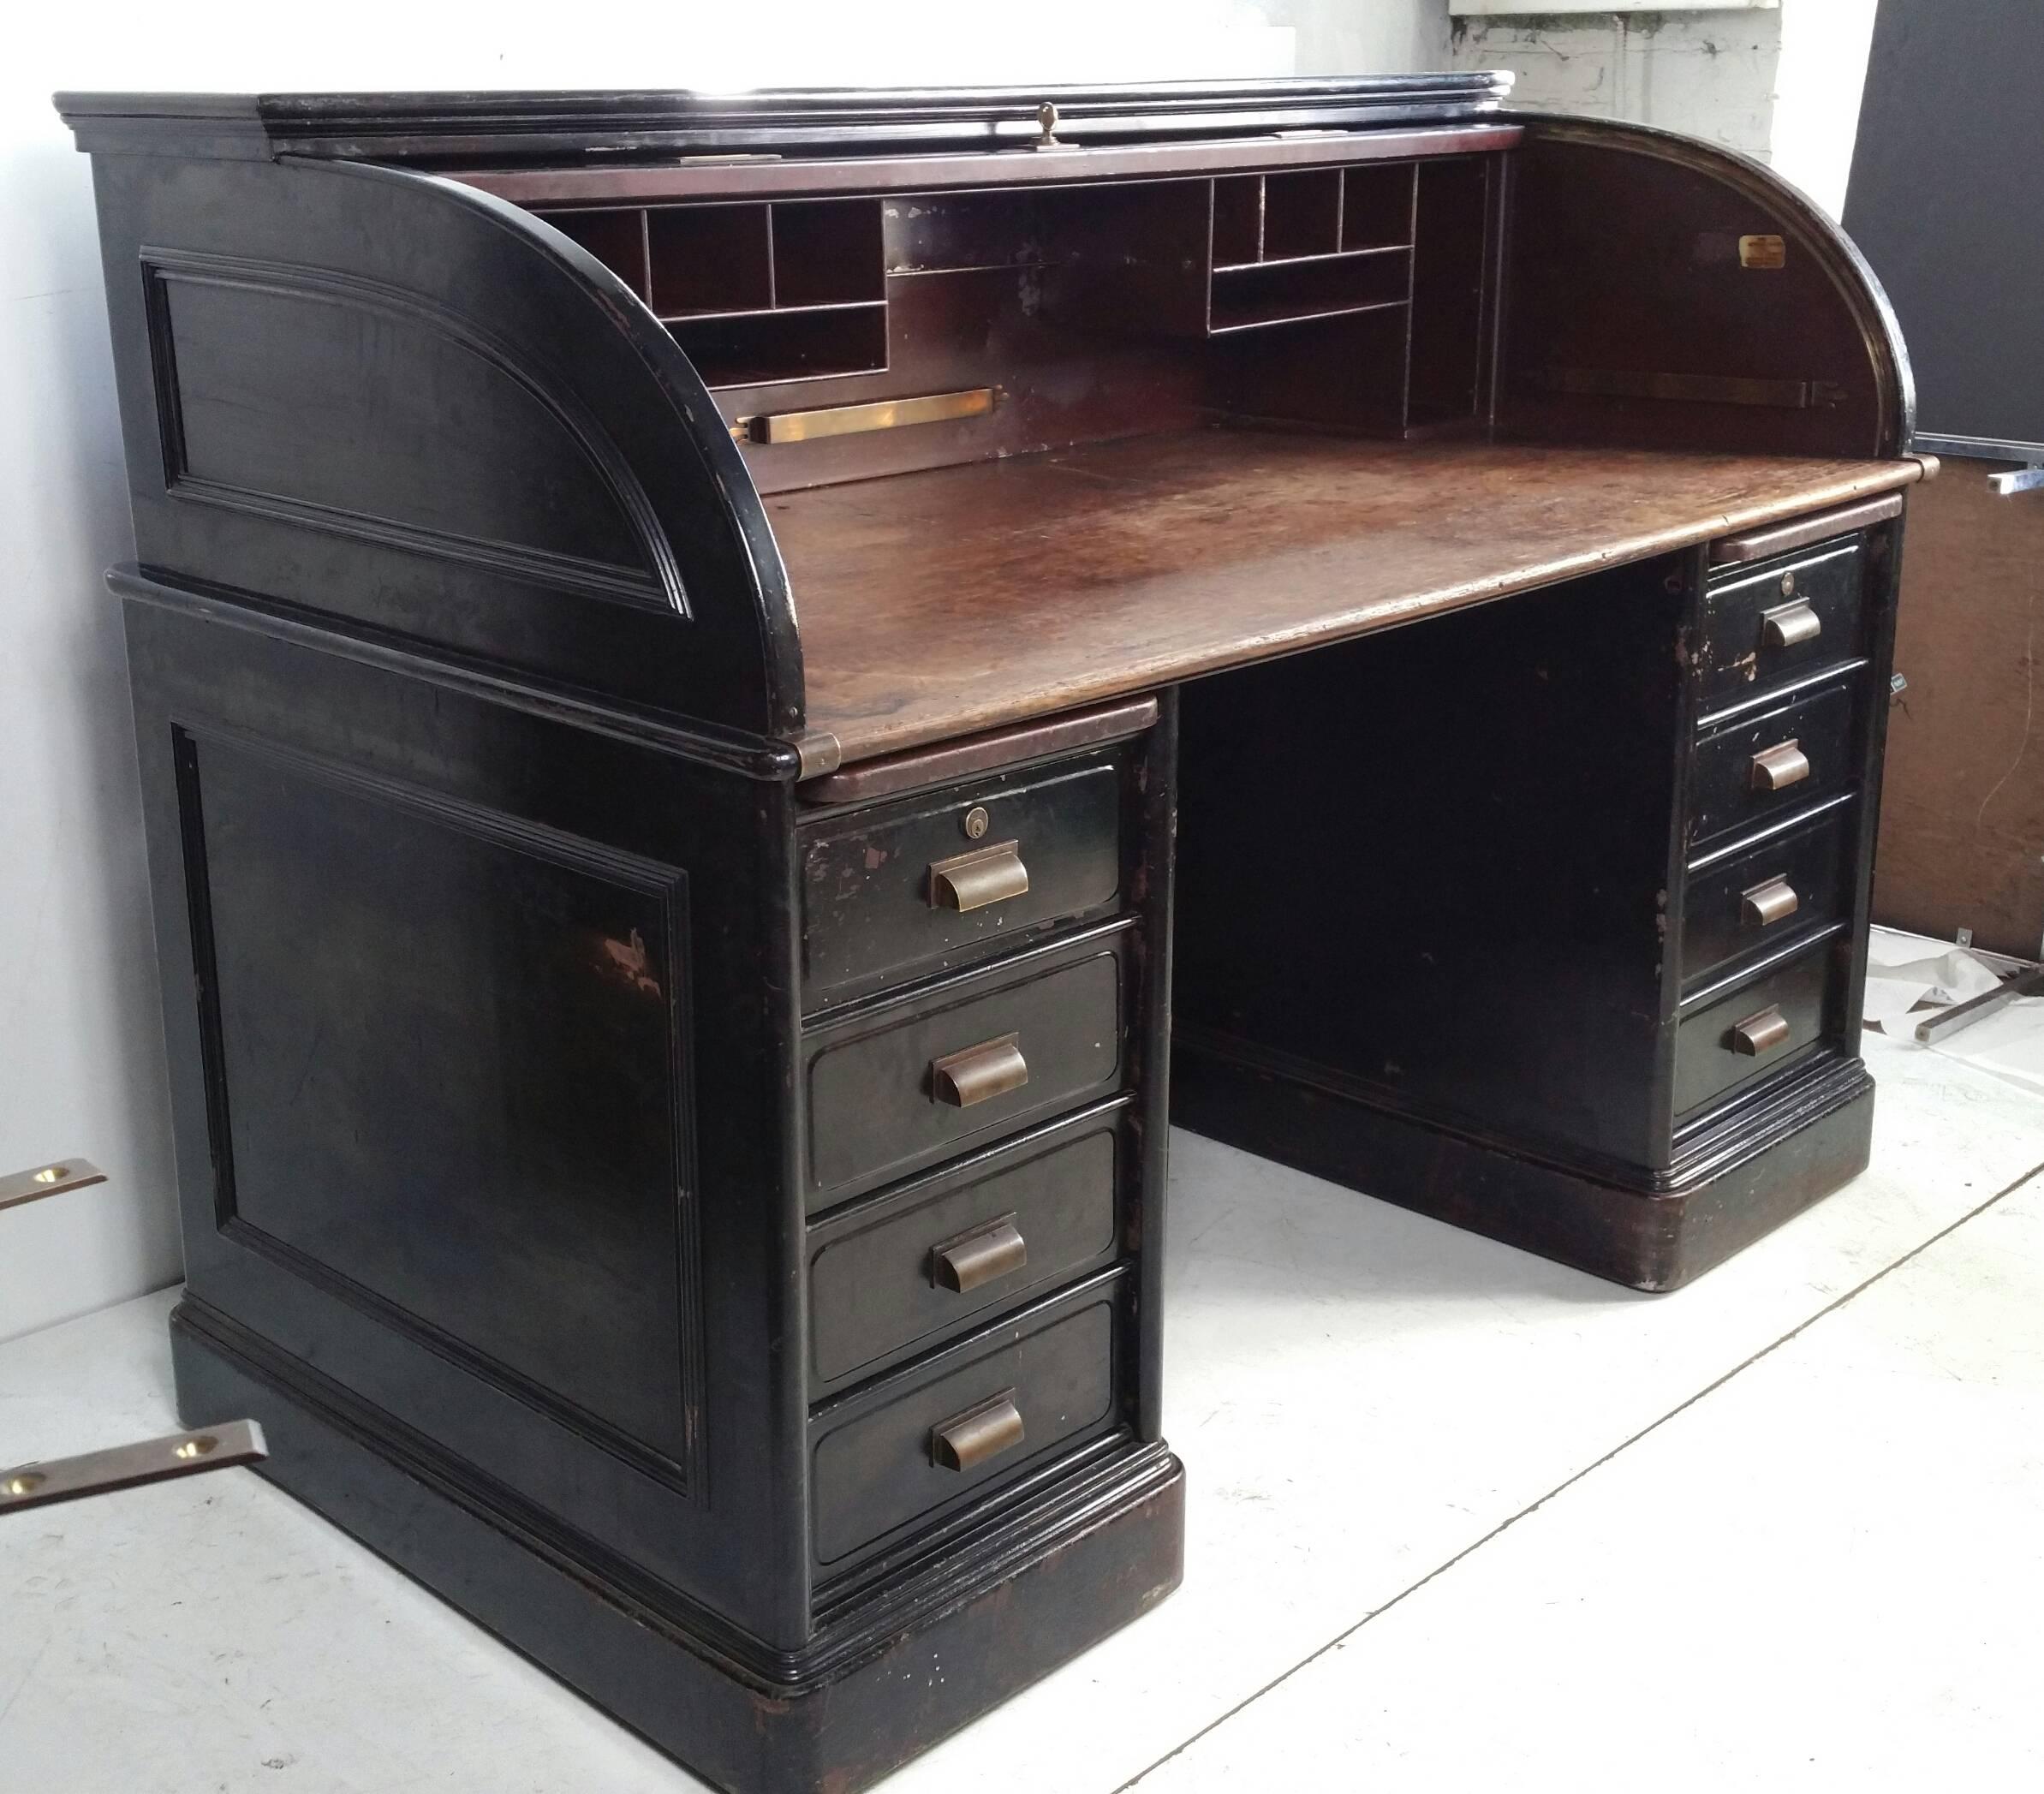 Monumental Industrial steel roll top desk manufactured by Fenton Metallic, the early maker which became Art Metal around the turn of the century, desk features beautiful quarter sawn oak desk top (rarely seen) Wonderful brass hand pulls as well as